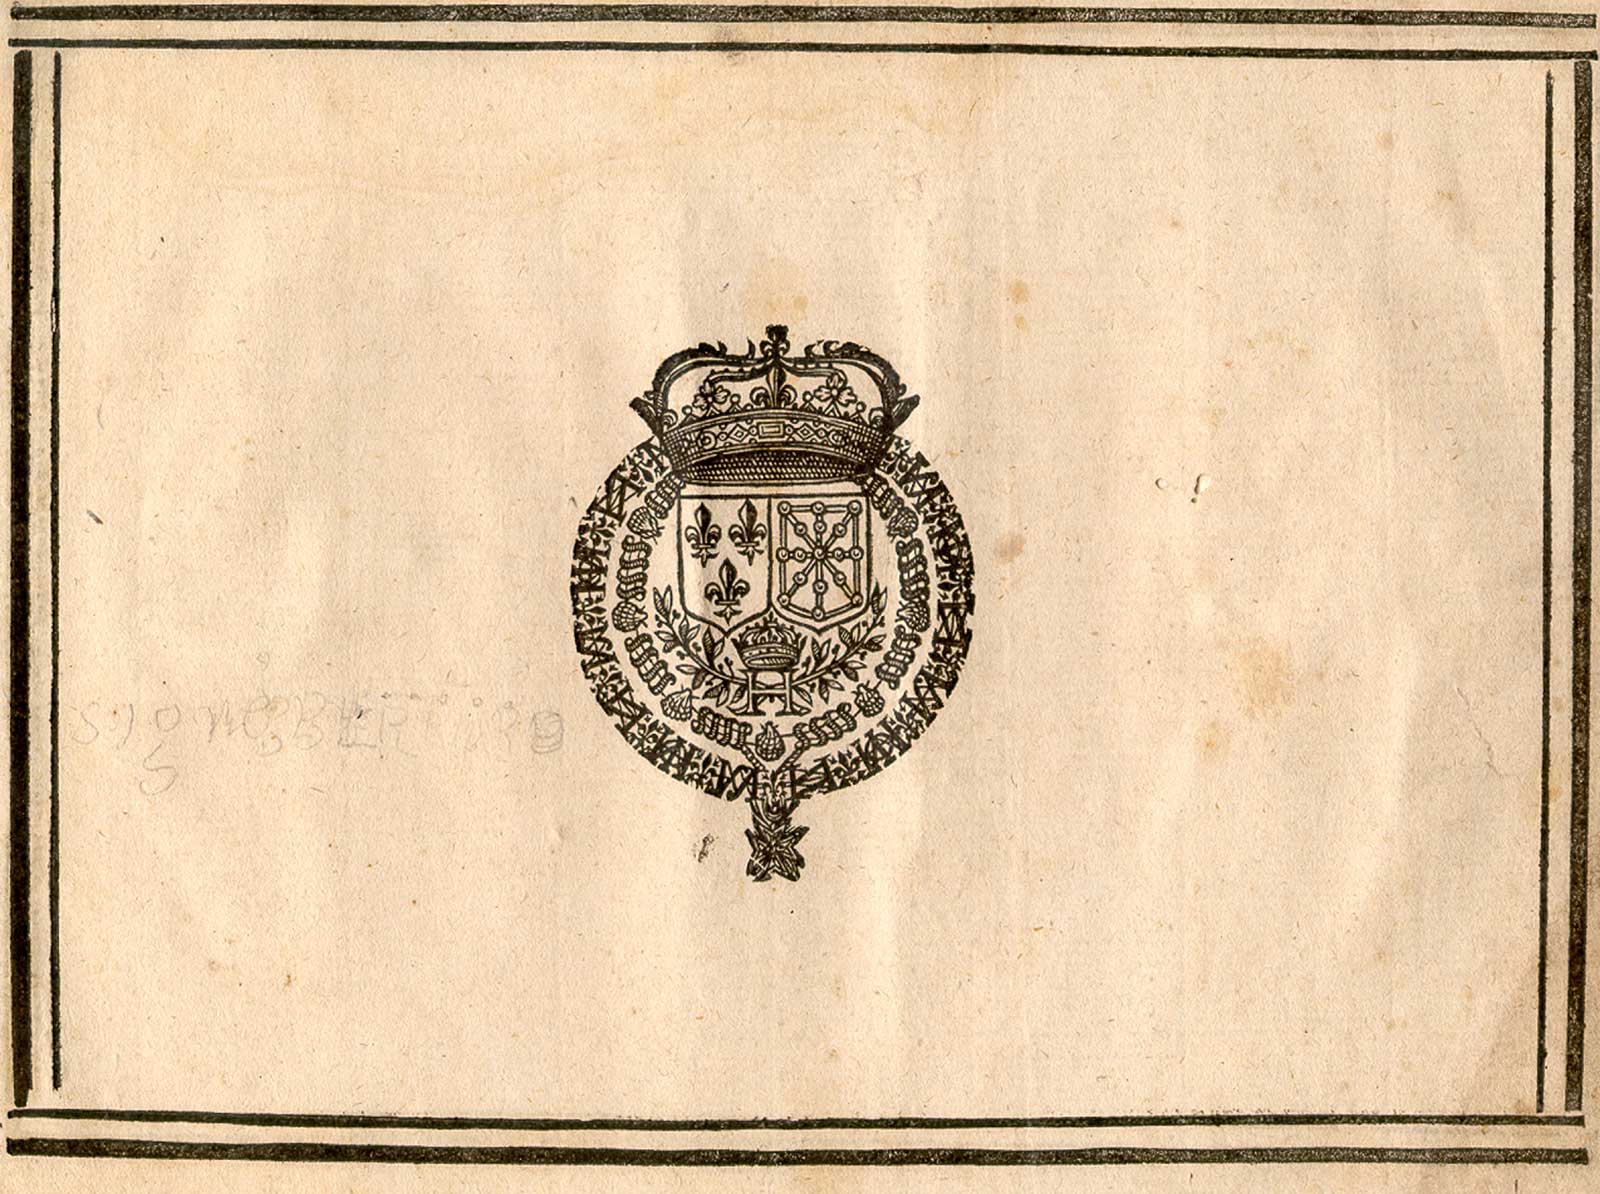 Woodcut of the royal seal of Henri IV of France on the colophon of the books, from Jehan Cousin’s Livre de pourtraiture, NLM Call no.: WZ 250 C8673L 1608.